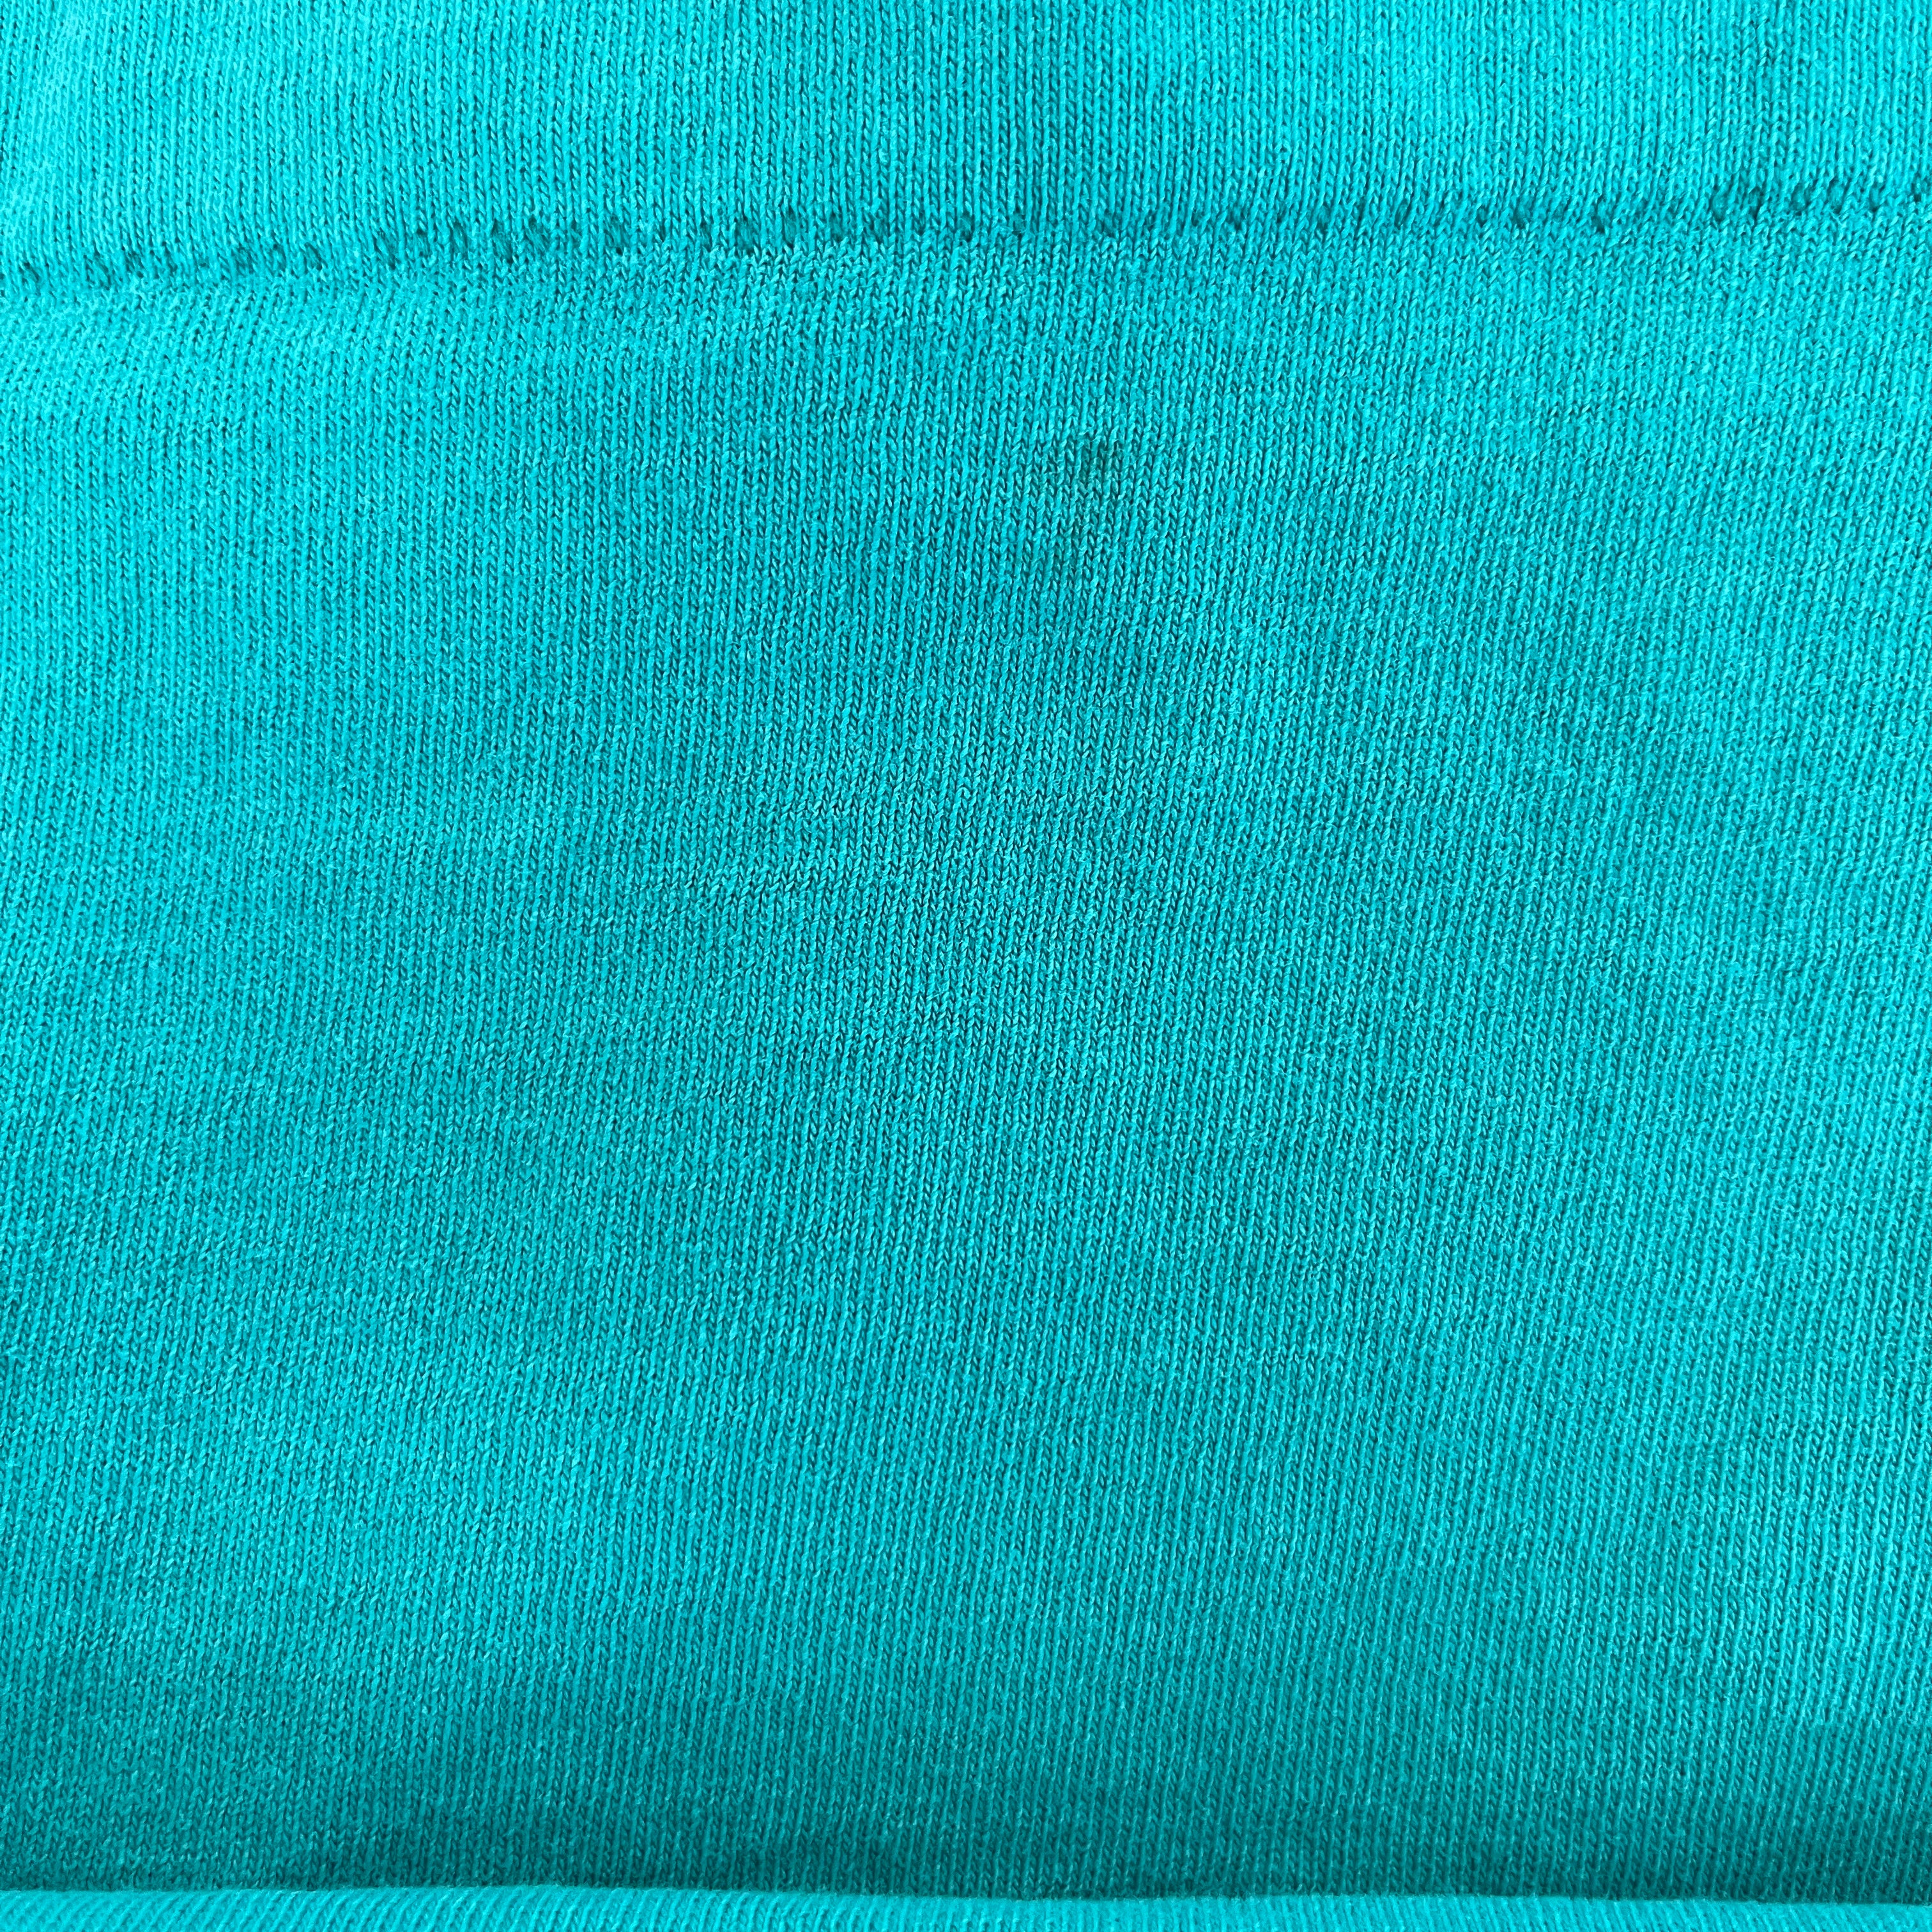 1992 Ocean Pacific Nicely Beat Up Teal T-Shirt